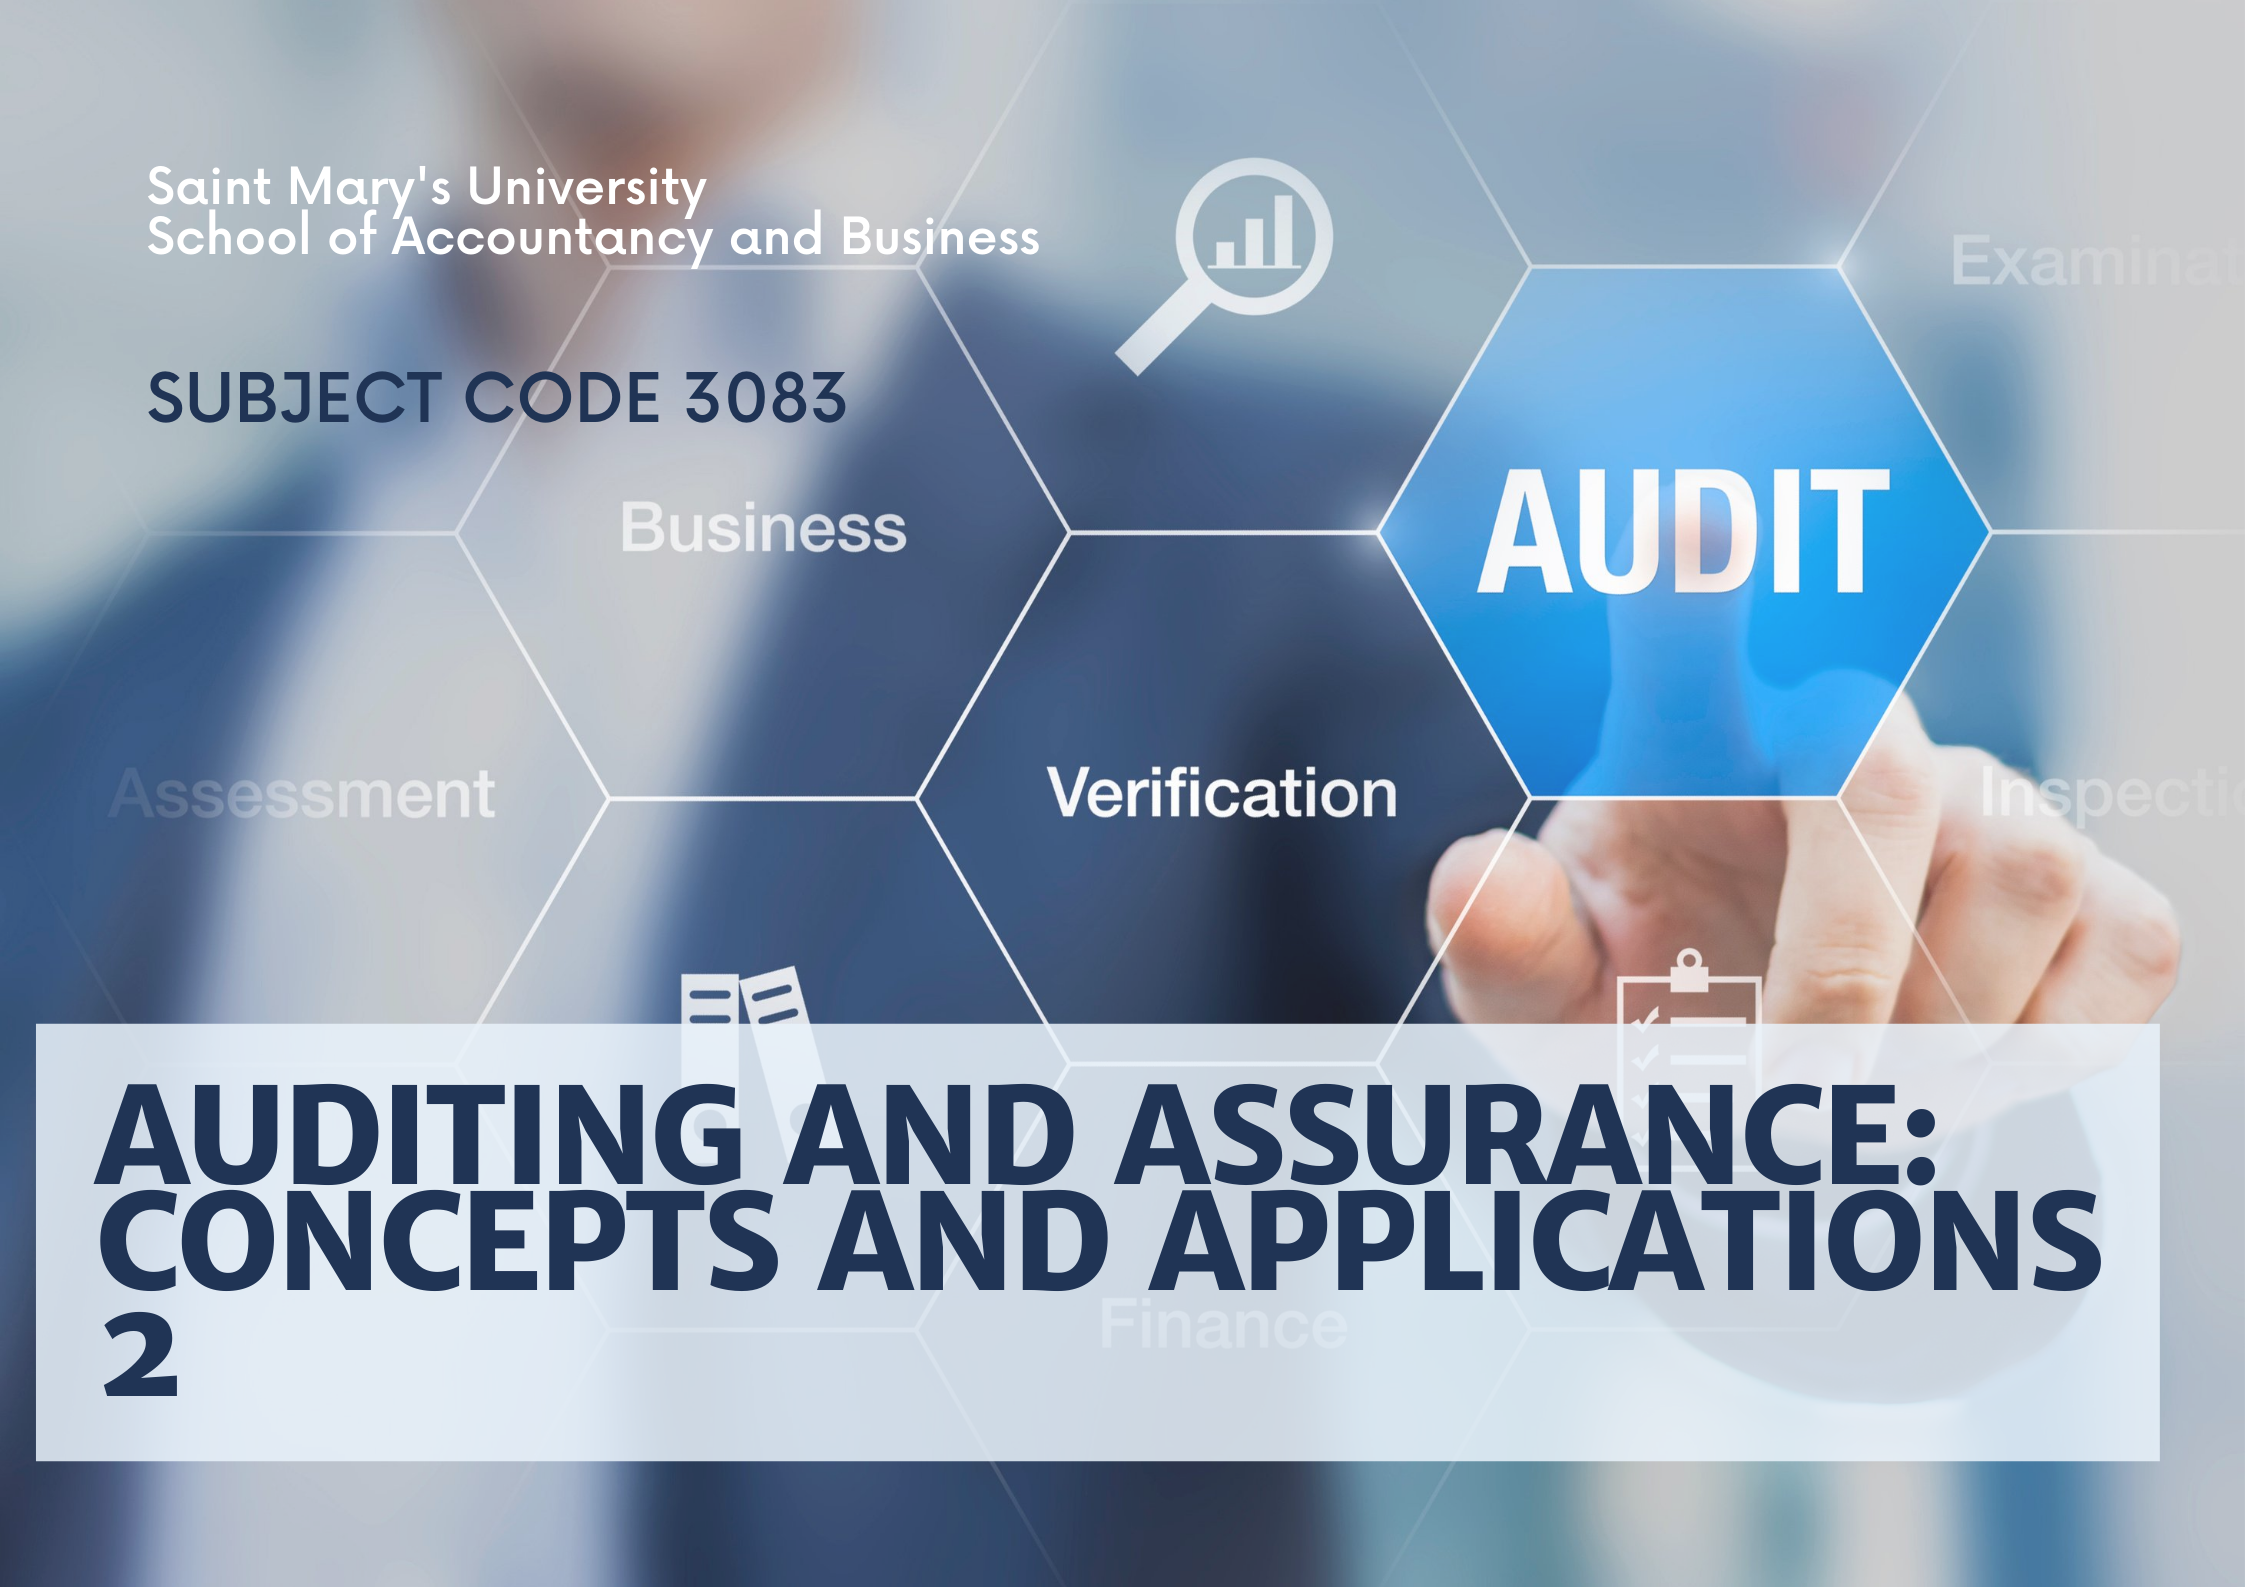 Auditing and Assurance: Concepts and Applications 2